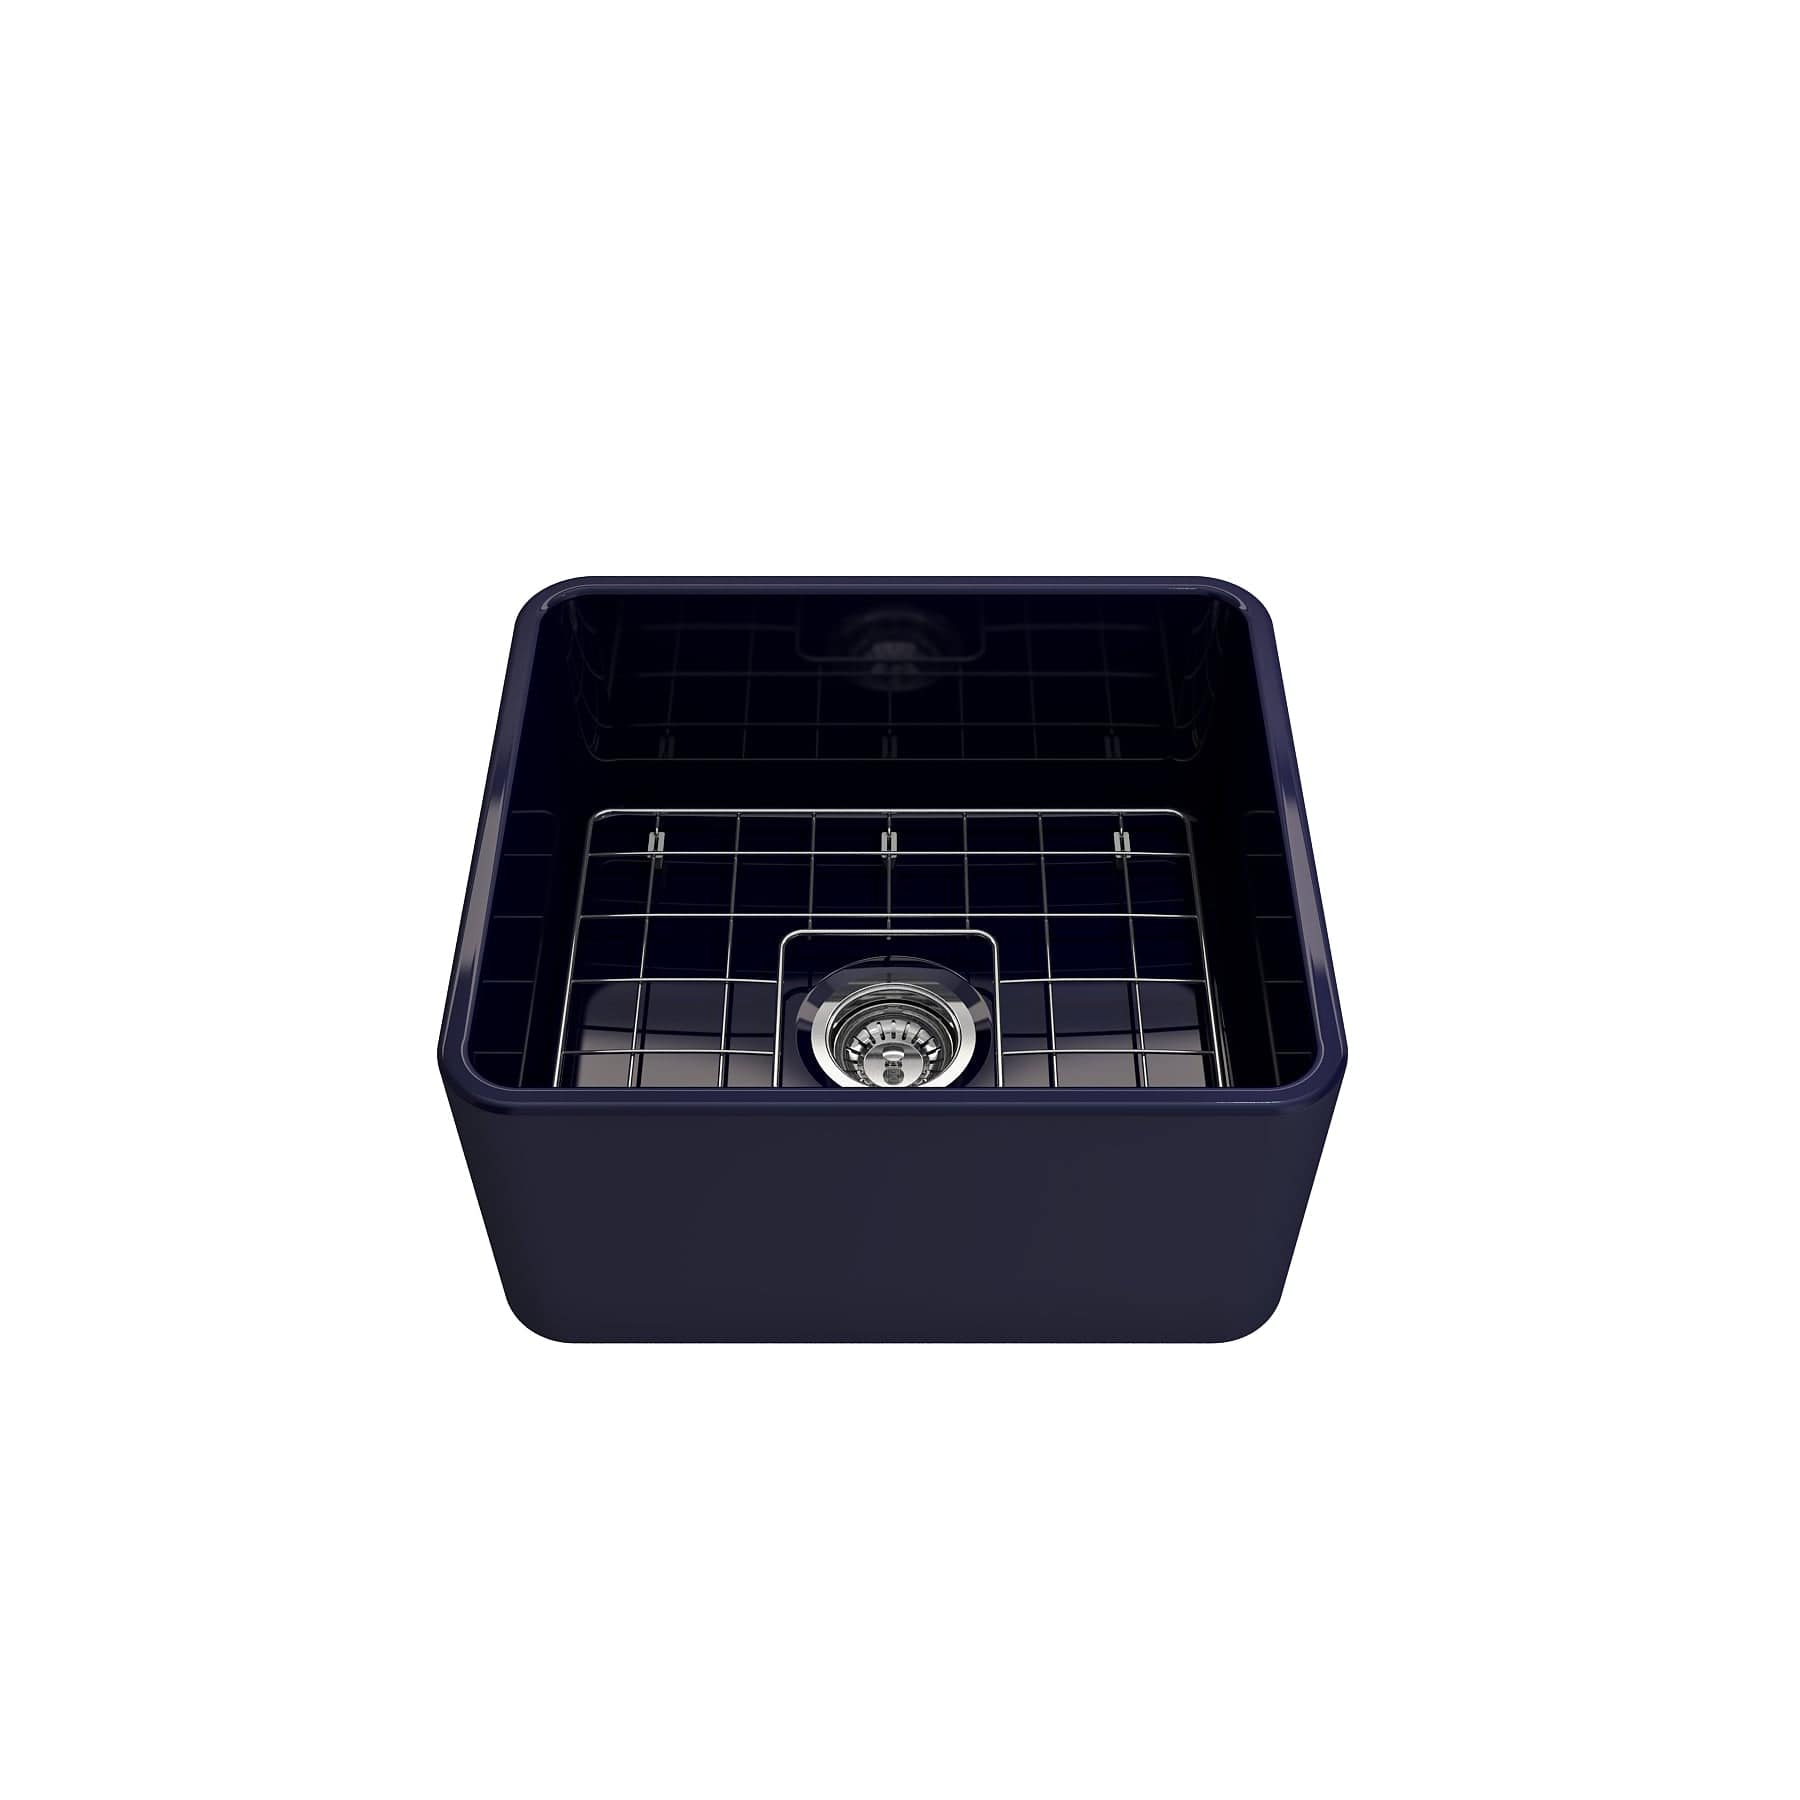 BOCCHI CLASSICO 20" Fireclay Farmhouse Single Bowl Kitchen Sink with Protective Bottom Grid and Strainer, SAPPHIRE BLUE - 1136-010-0120 - Manor House Sinks